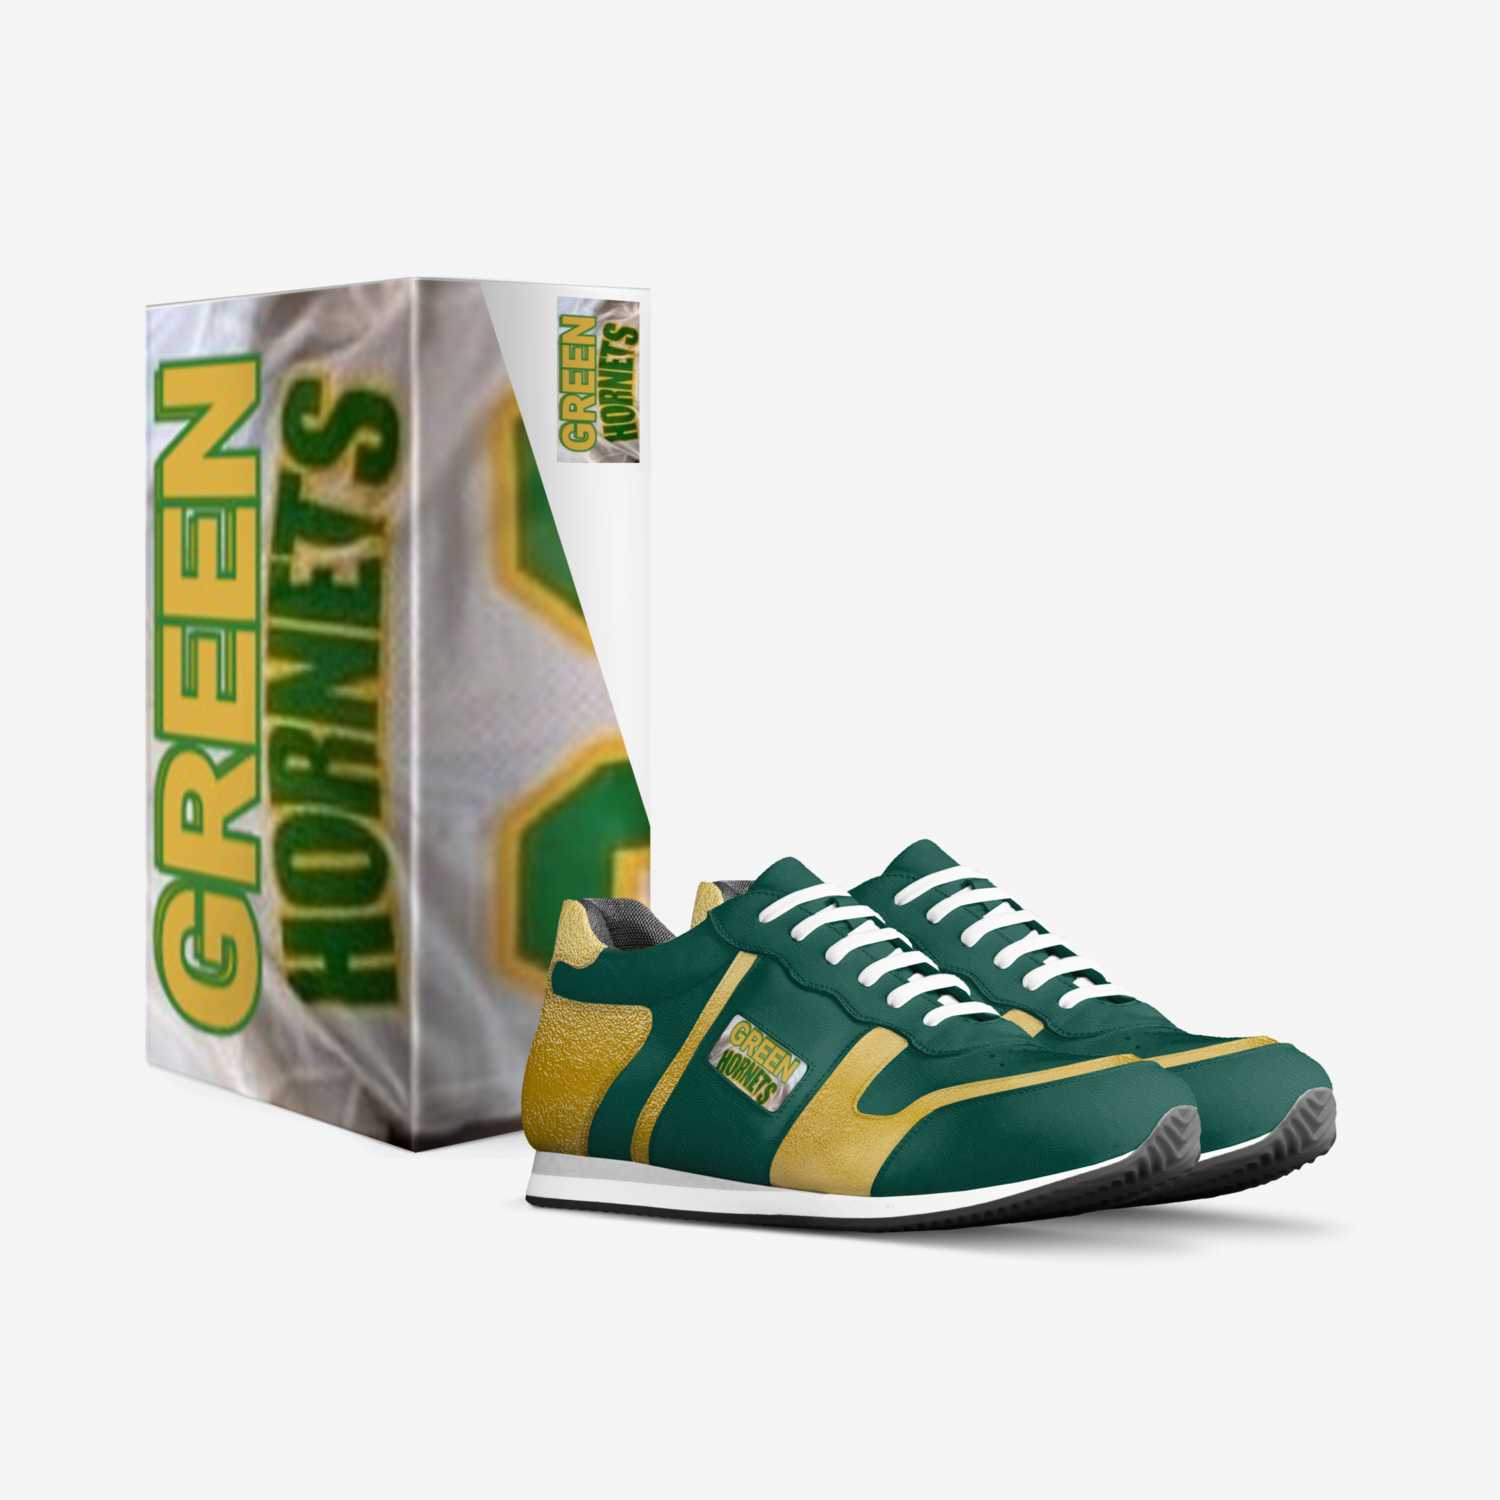 GREEN HORNETS custom made in Italy shoes by Carlos Jones | Box view